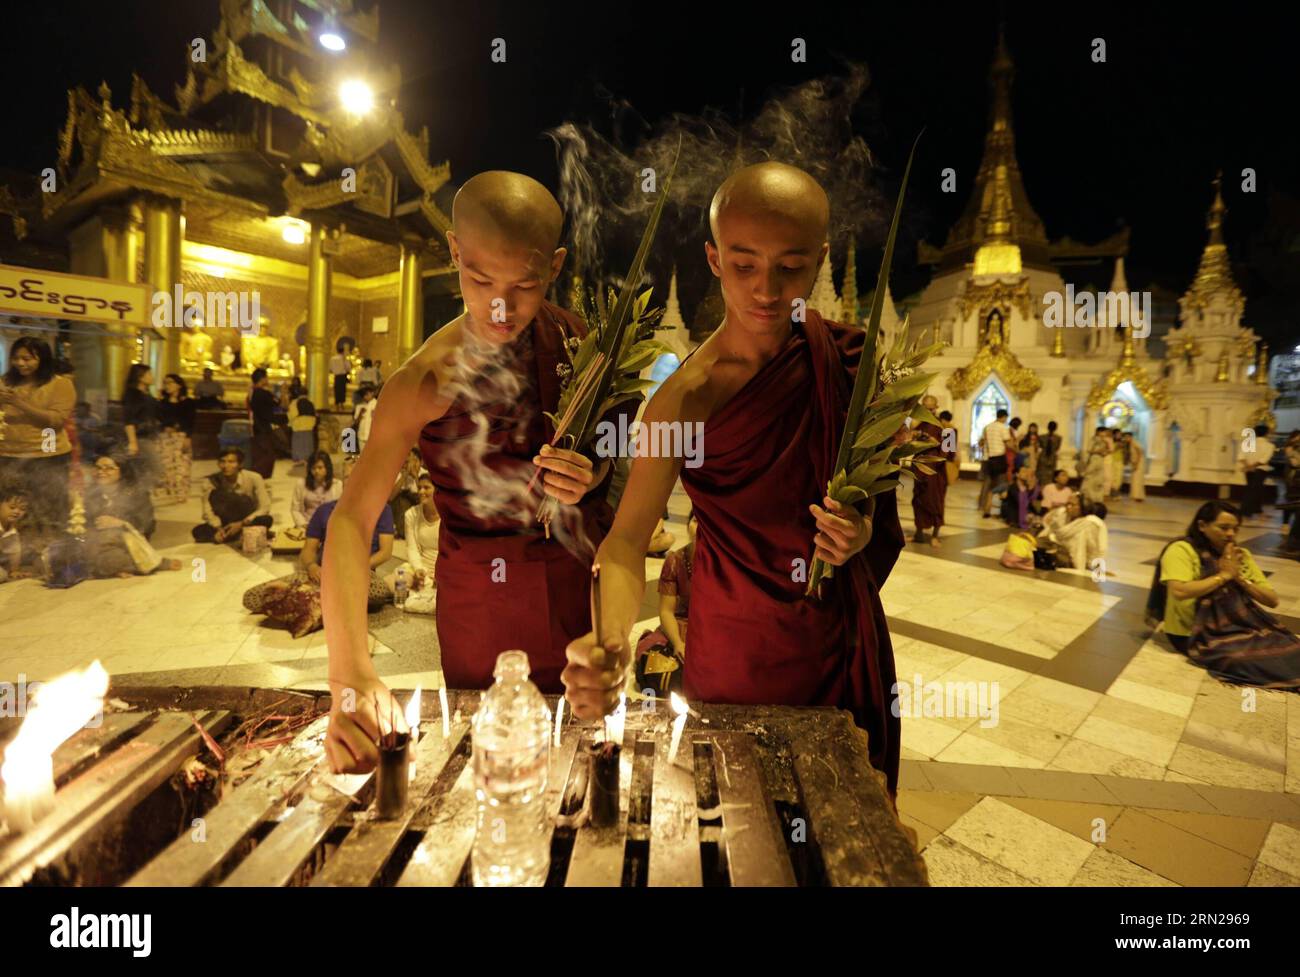 YANGON, Feb. 17, 2015 -- Buddhist novices light candles and burn incense sticks to pray at the Shwedagon pagoda in Yangon, Myanmar, Feb. 17, 2015. Shwedagon Pagoda is a repository of the best of Myanmar s heritages -- architecture, sculpture and arts. It consists of hundreds of colorful temples, stupas and statues that reflect architectural styles spanning almost 2,500 years. ) MYANMAR-YANGON-SHWEDAGON PAGODA UxAung PUBLICATIONxNOTxINxCHN   Yangon Feb 17 2015 Buddhist novices Light Candles and Burn incense Sticks to Pray AT The Shwedagon Pagoda in Yangon Myanmar Feb 17 2015 Shwedagon Pagoda IS Stock Photo